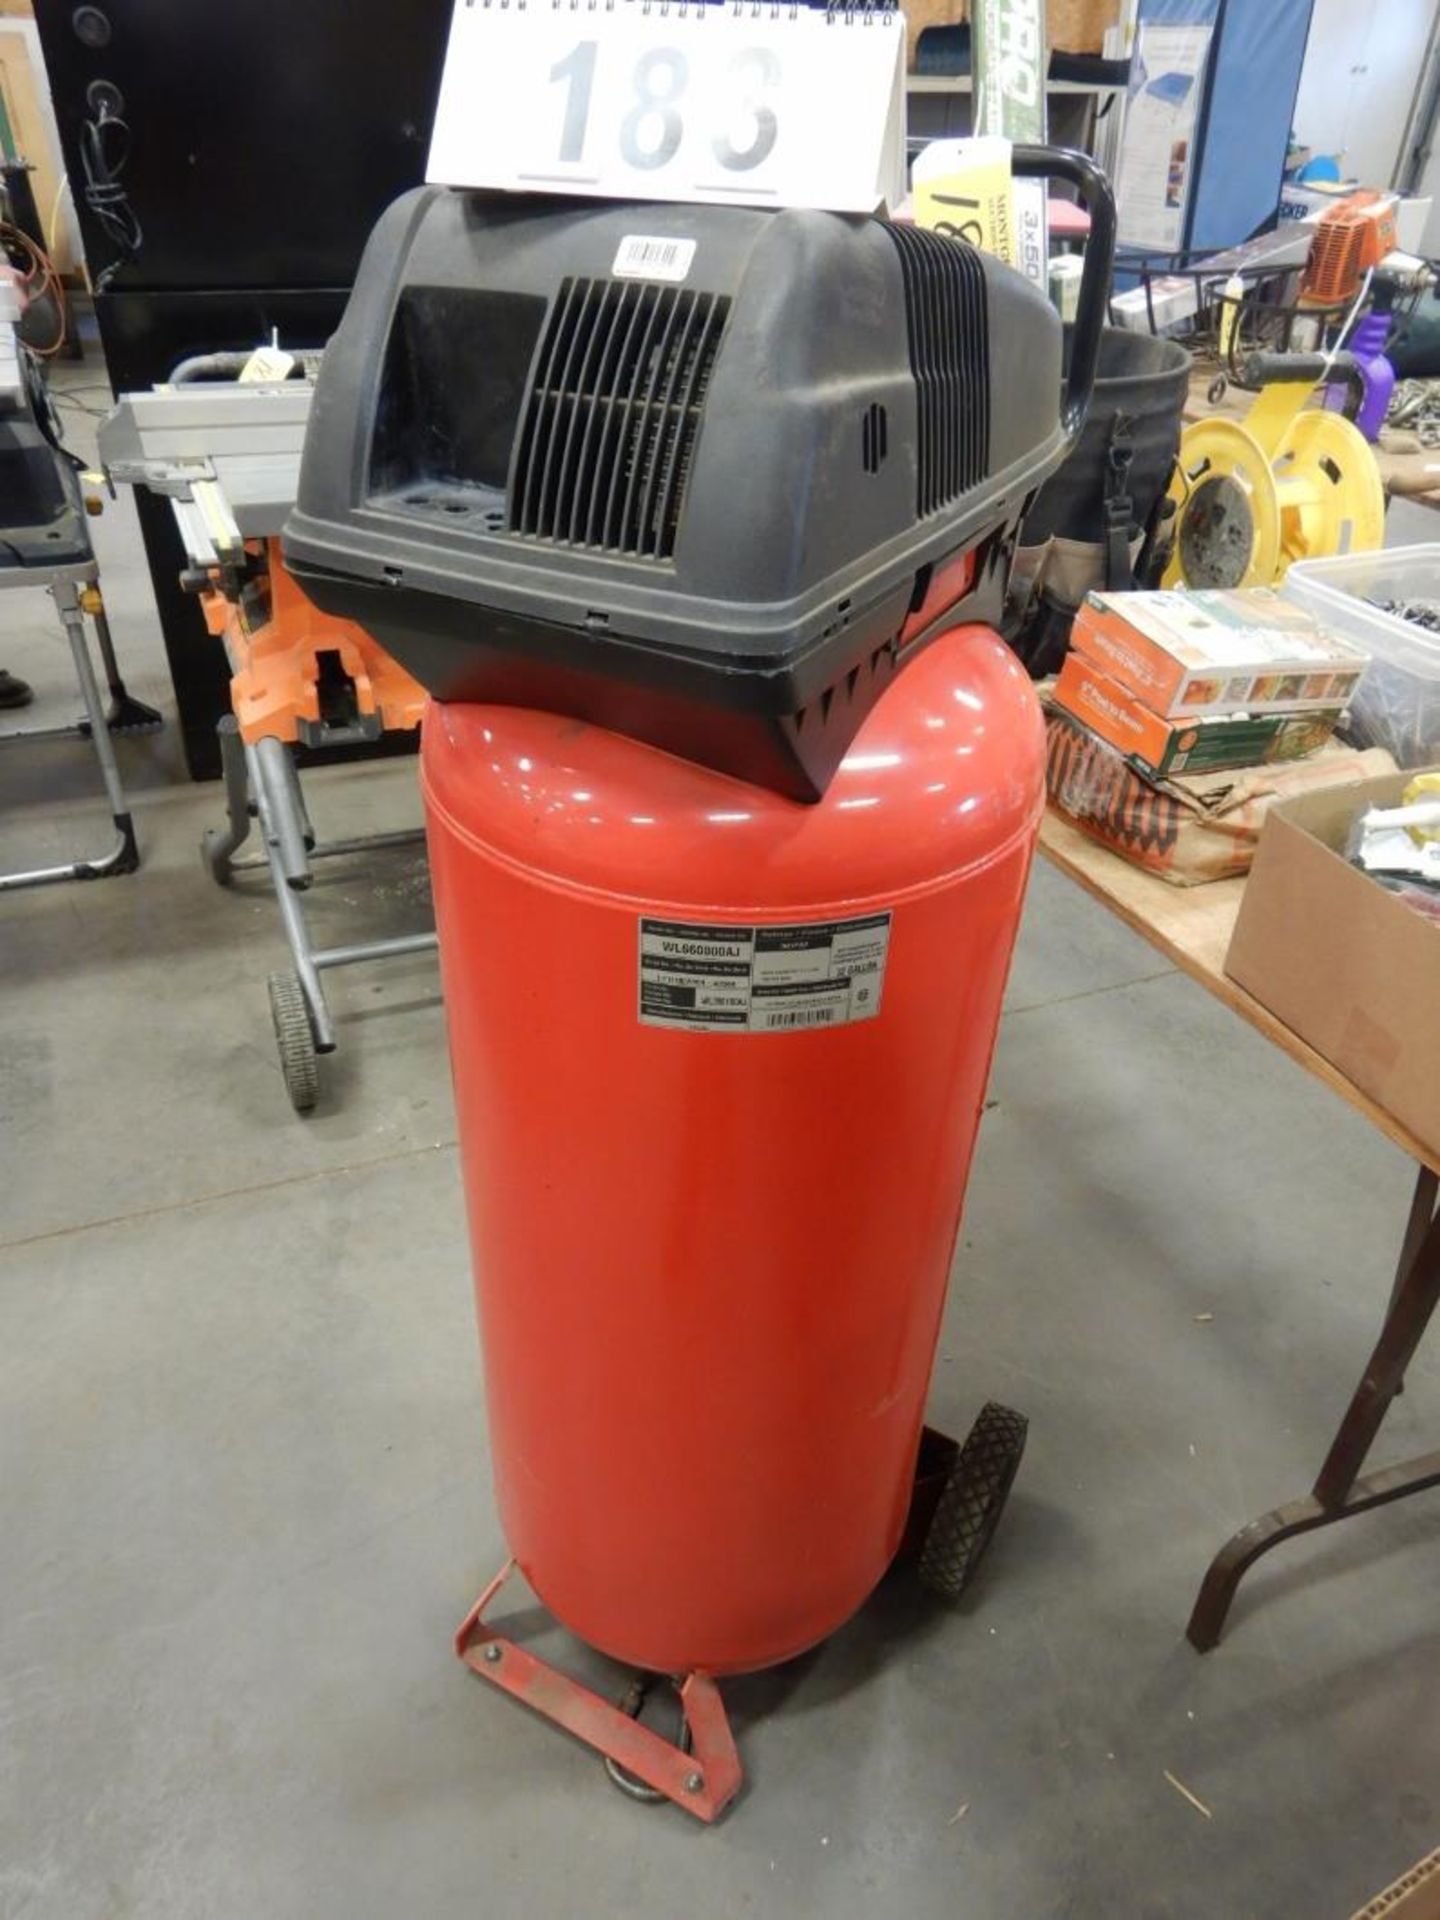 HUSKY UPRIGHT PORTABLE AIR COMPRESSOR, 5.5 HP, 32 GAL, 150 PSI - Image 5 of 6